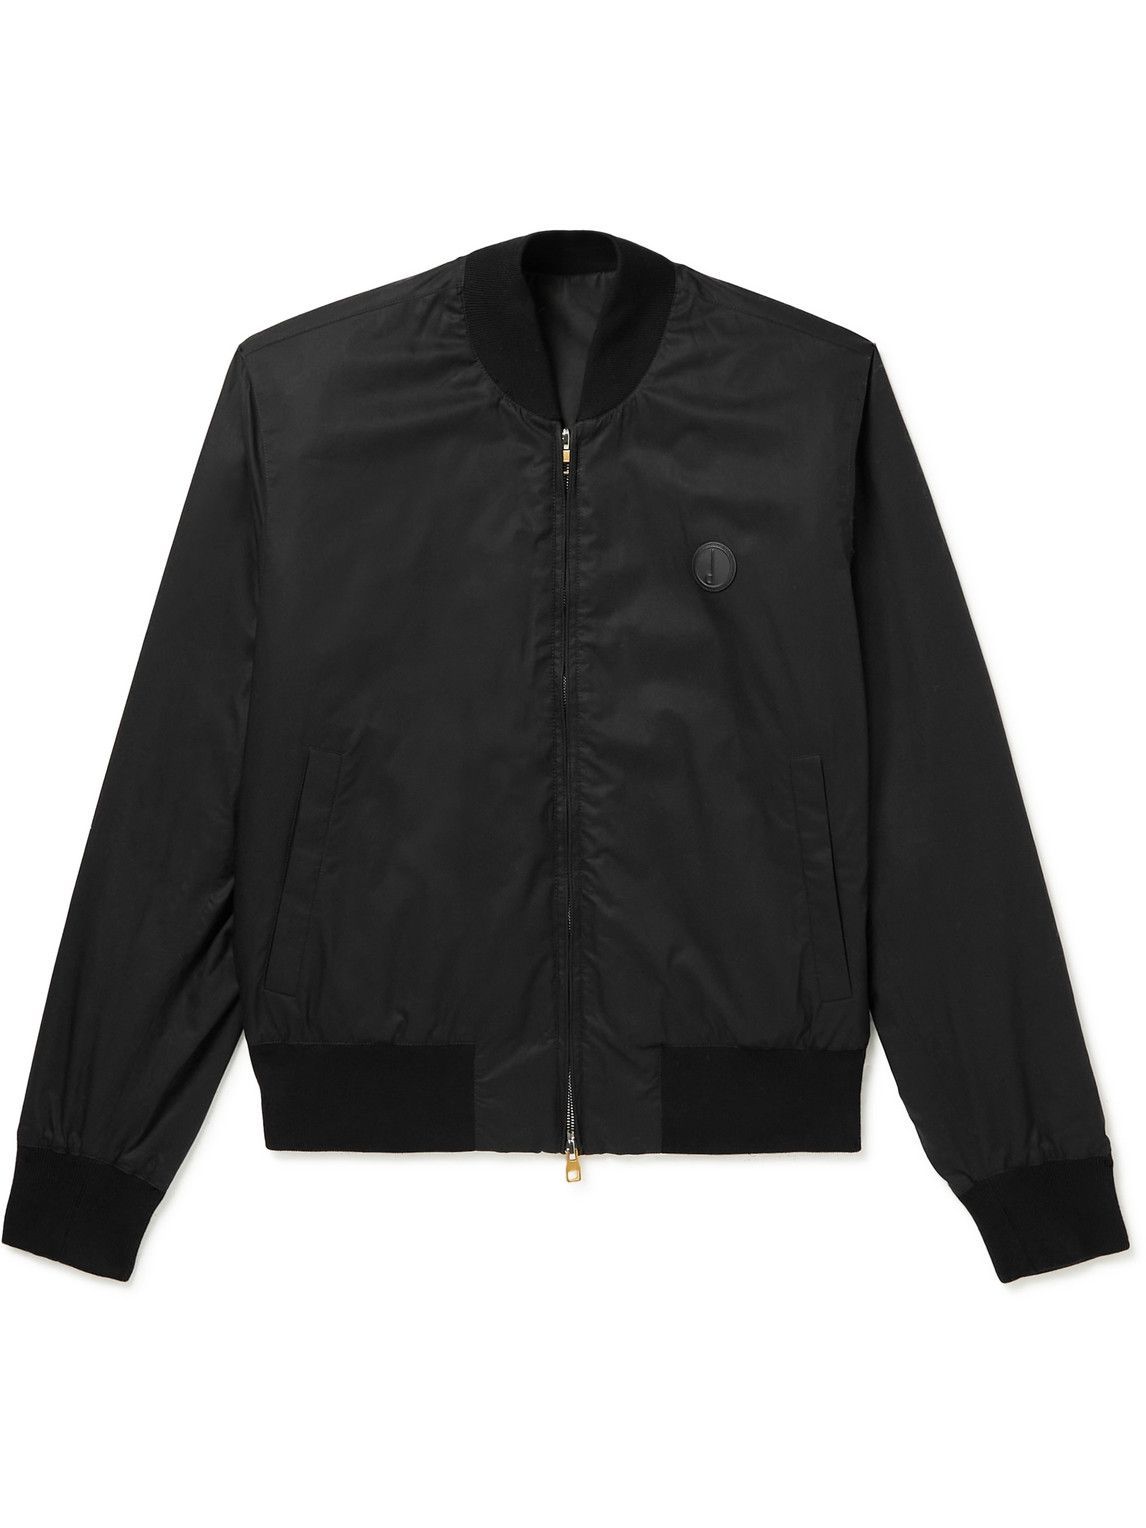 Dunhill - Reversible Cotton and Shell Bomber Jacket - Black Dunhill